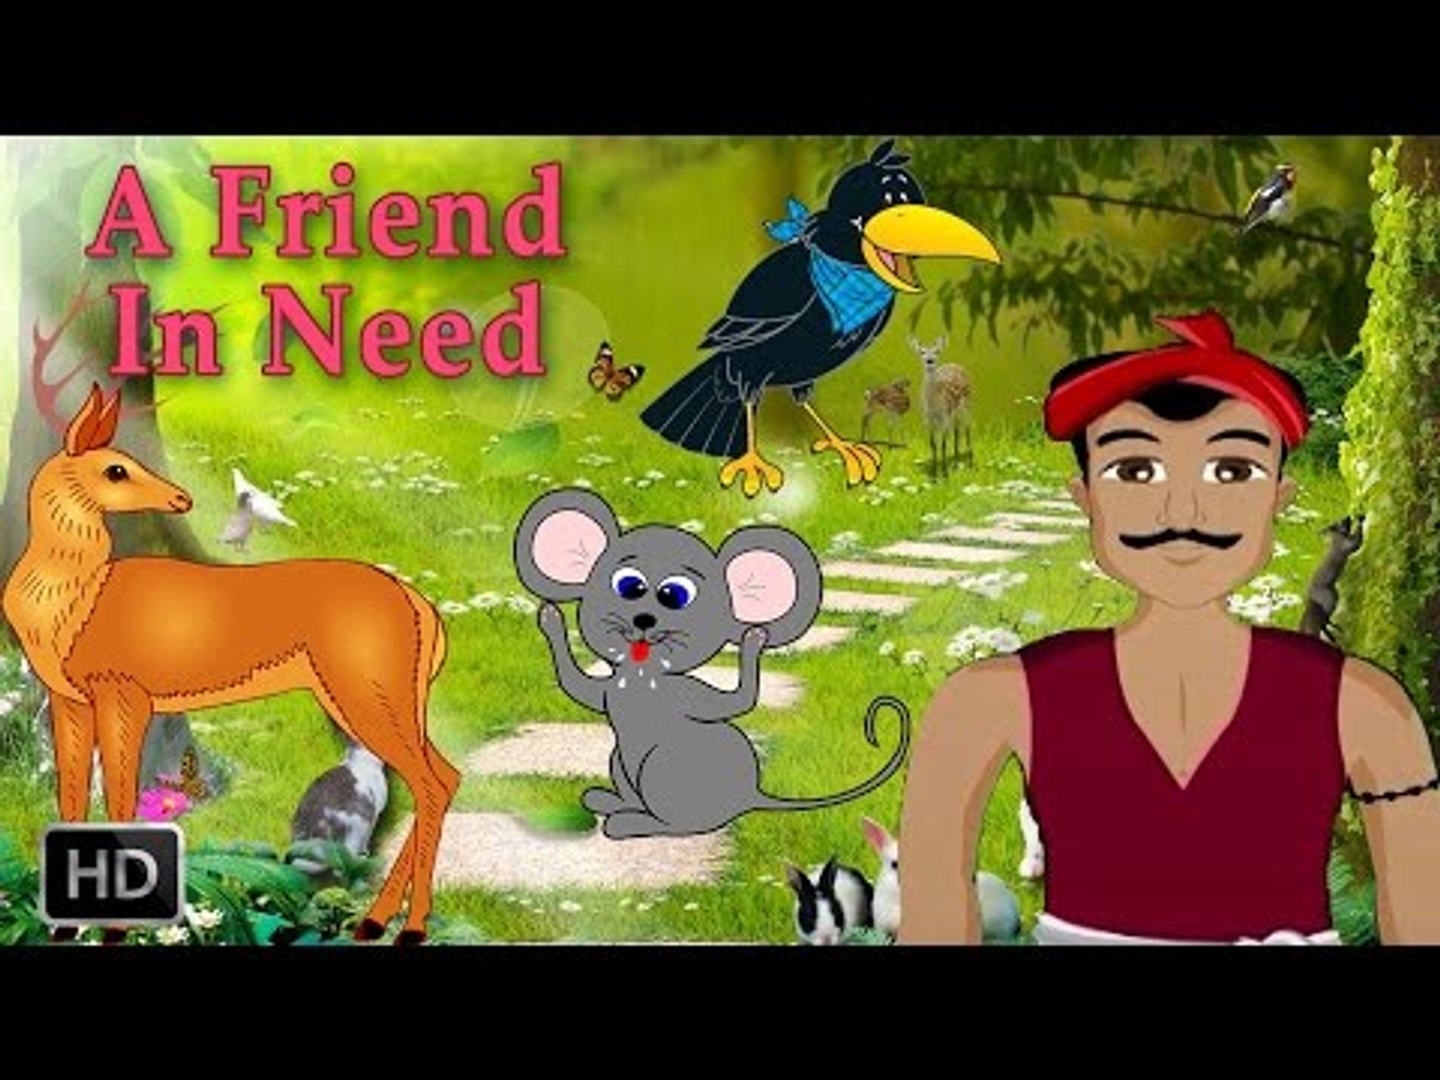 Forest Stories For Children - Animal Stories - A Friend In Need - Short  Moral Stories For Kids - video Dailymotion